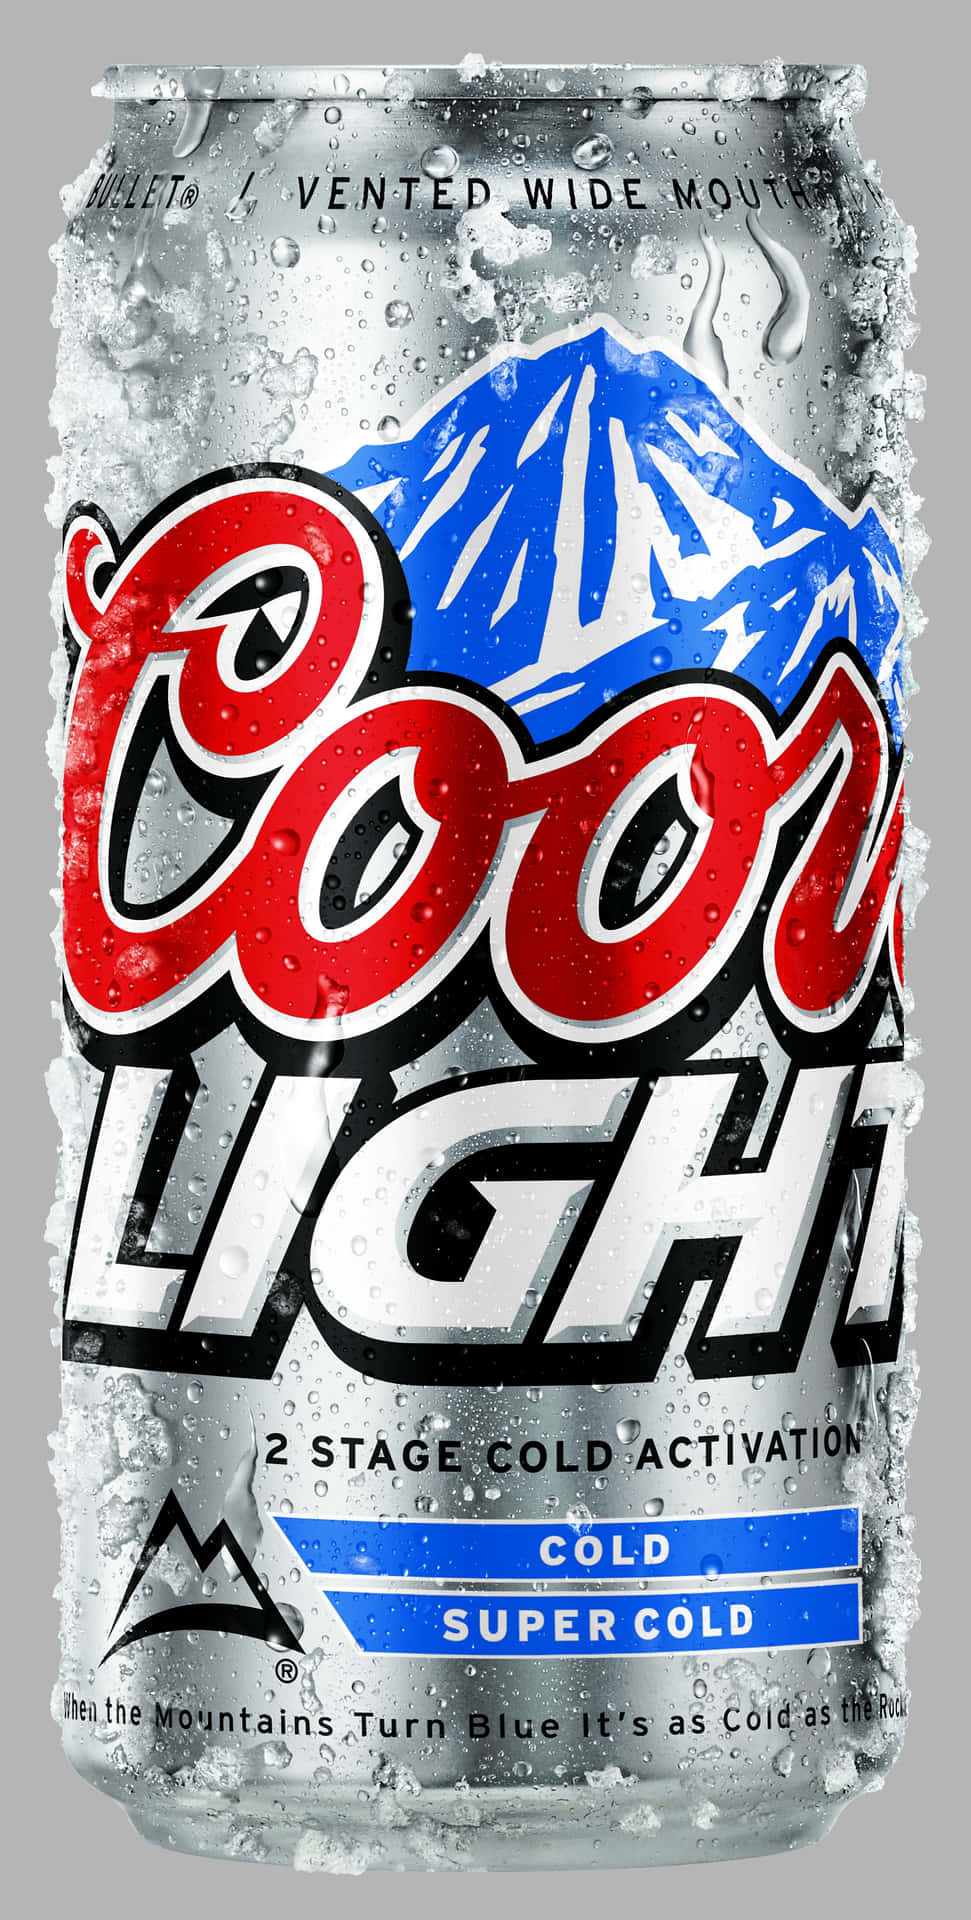 Ice cold refreshment for any occasion Wallpaper